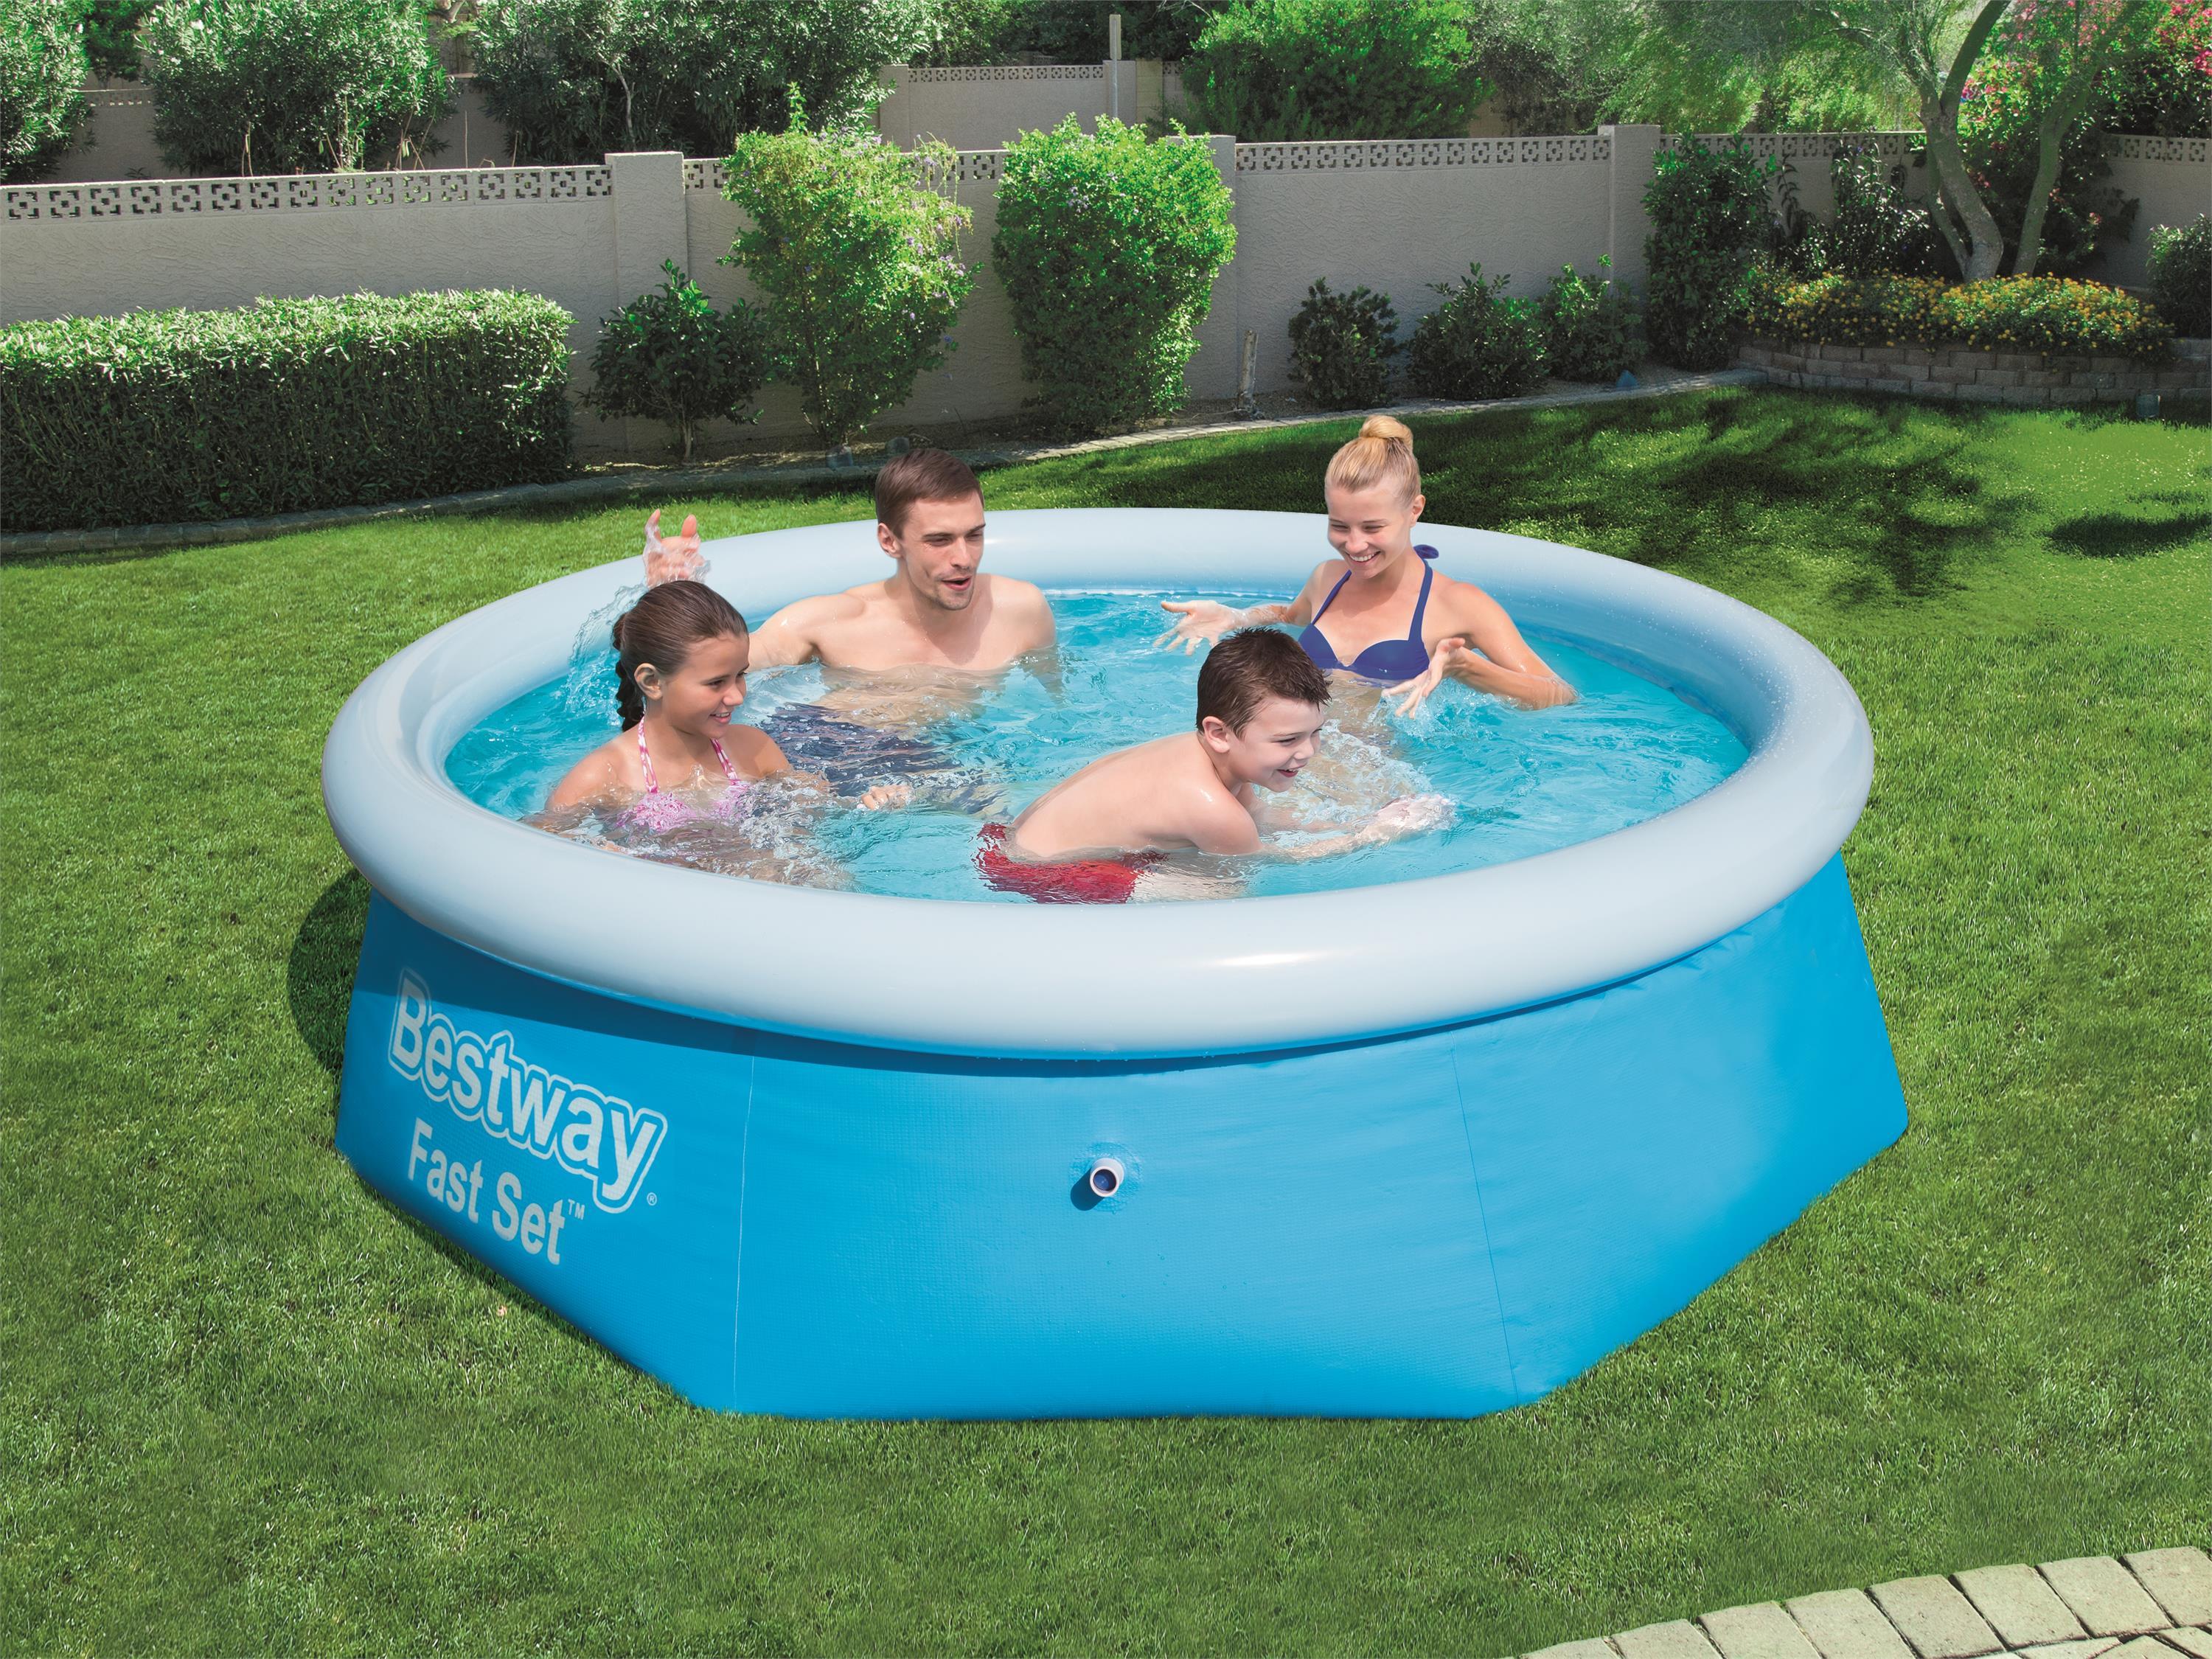 Top ring inflatable pool